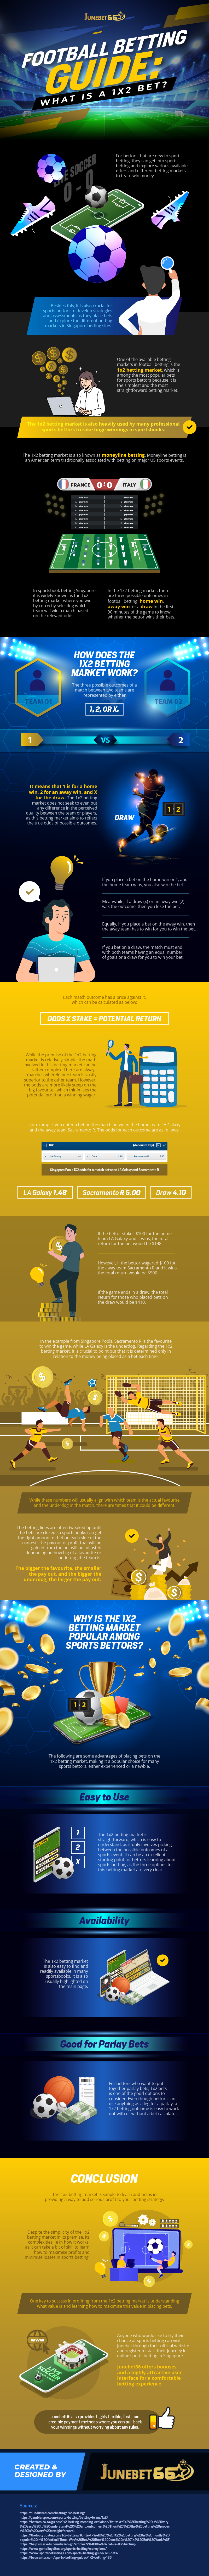 Football_Betting_Guide_What_is_a_1X2_Bet_infographic_image